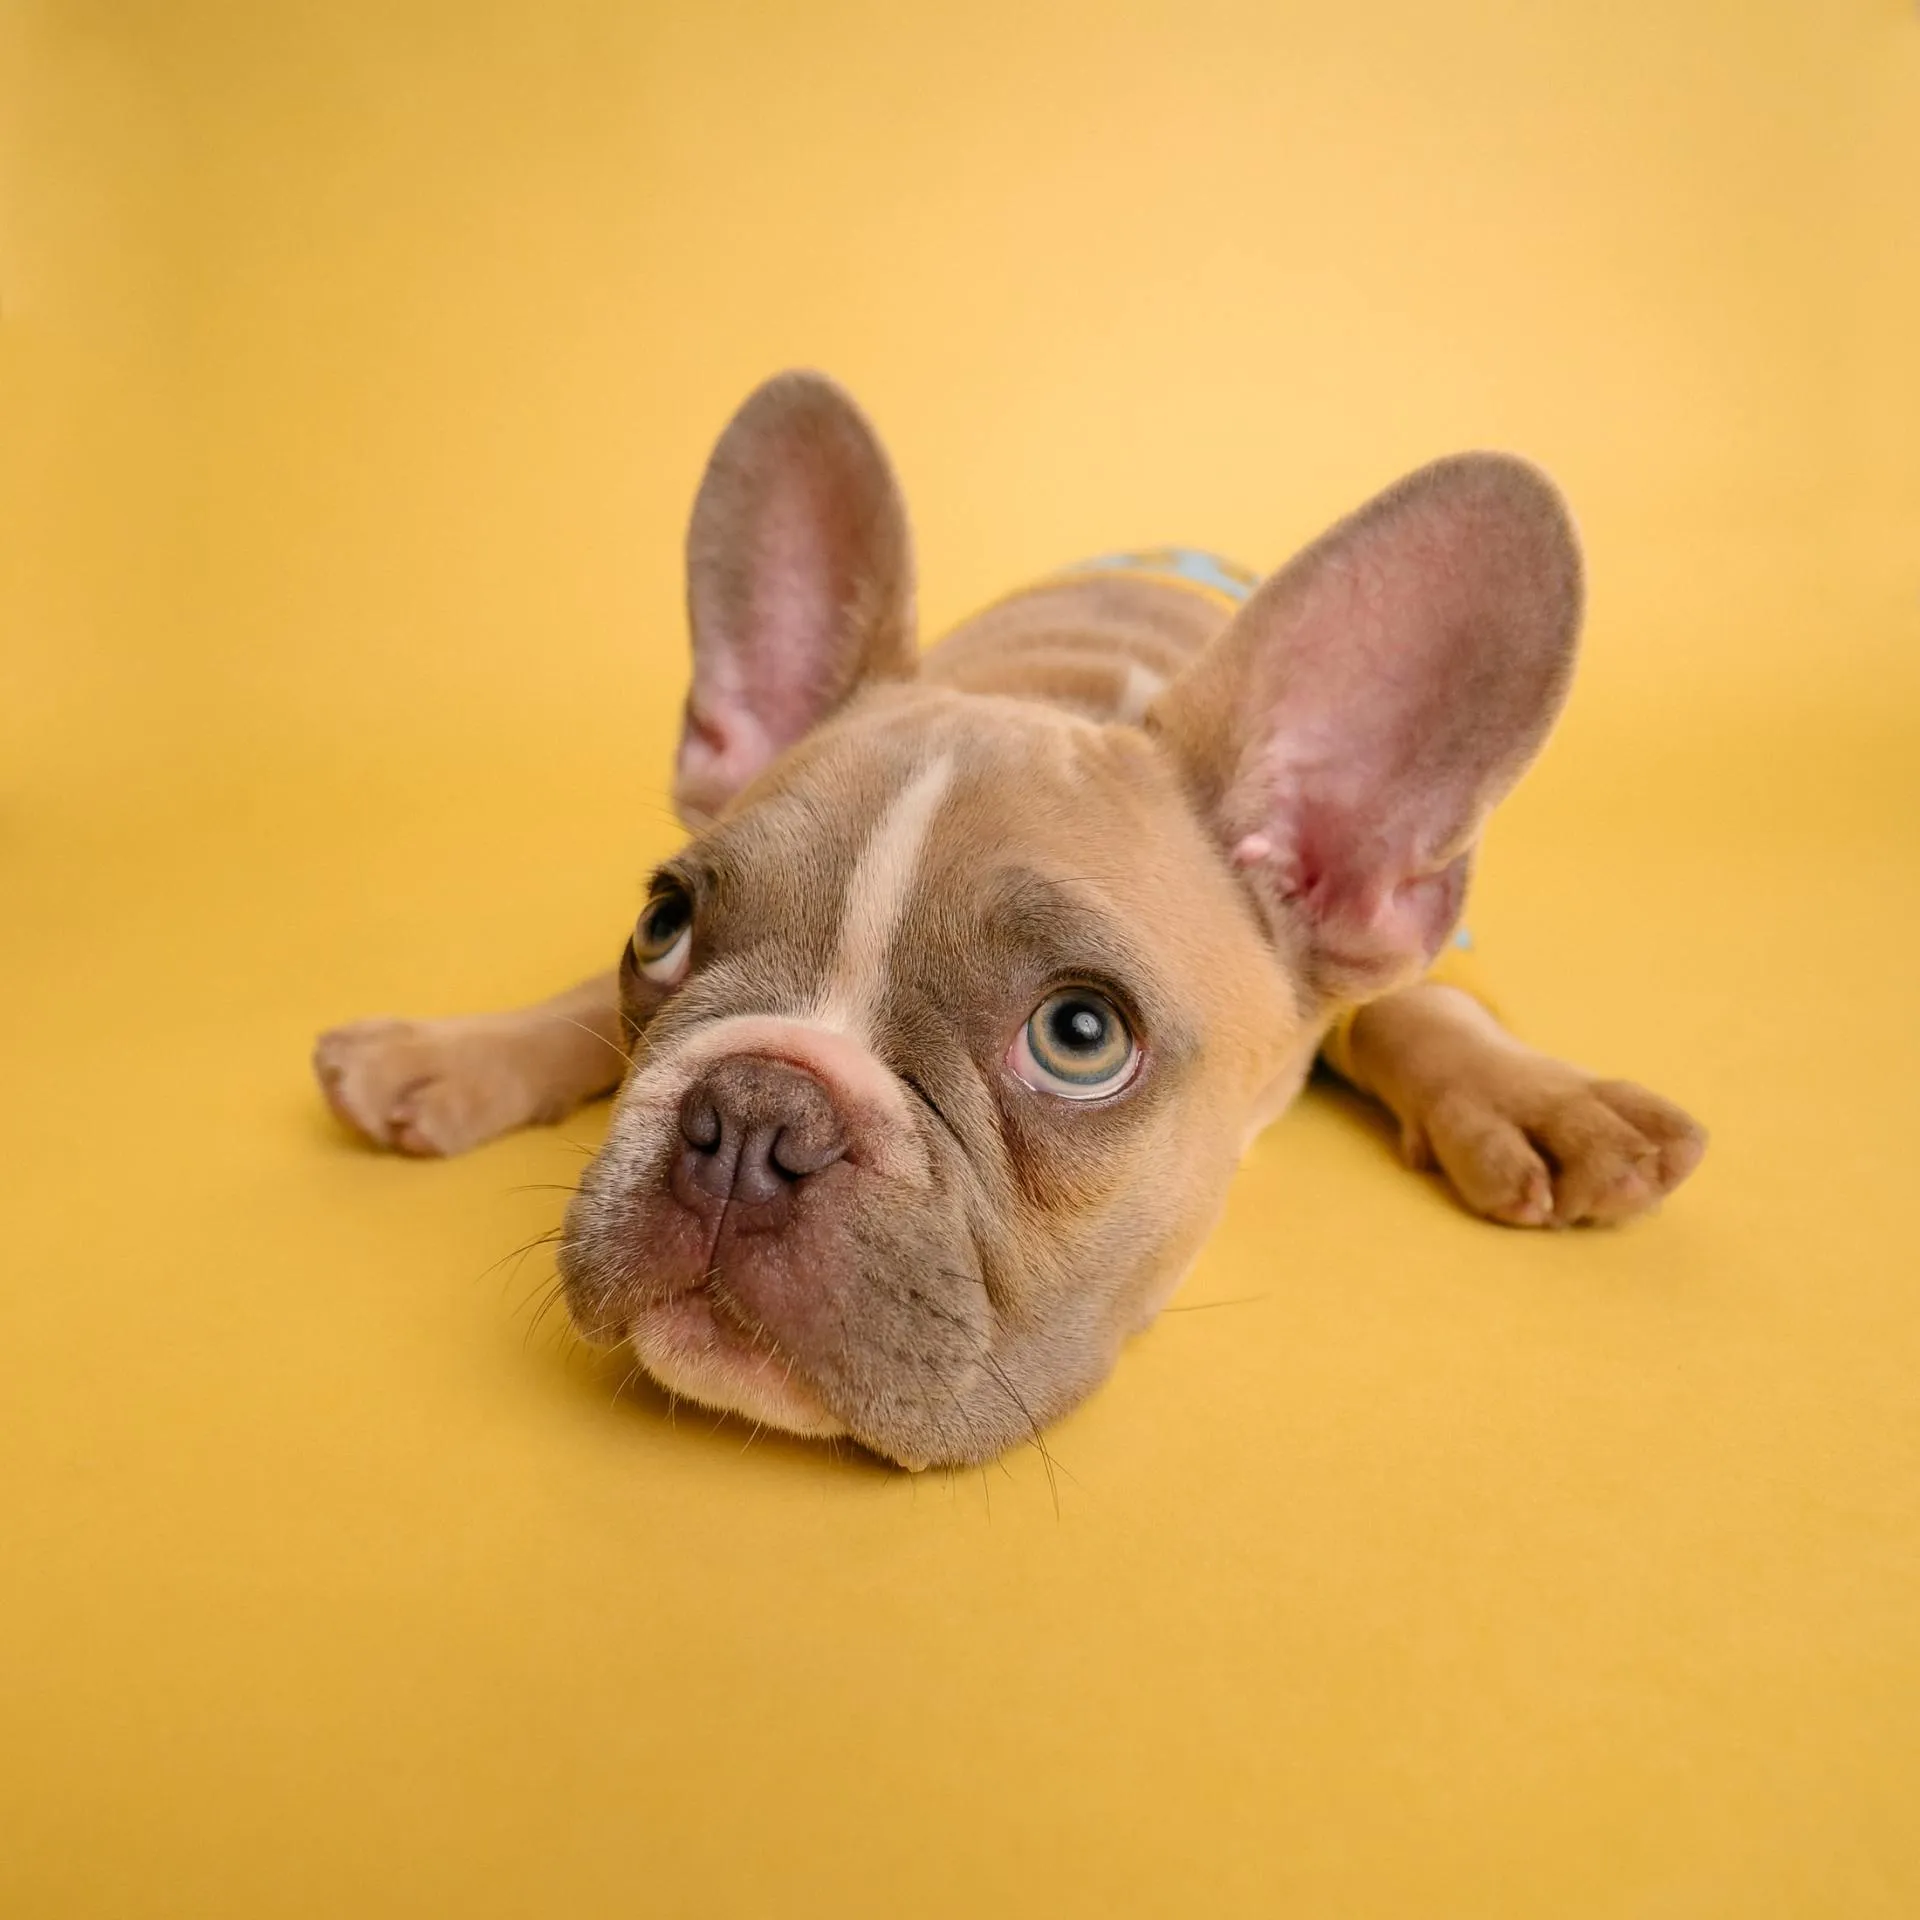 Dog with cute large ears laying on a yellow backdrop